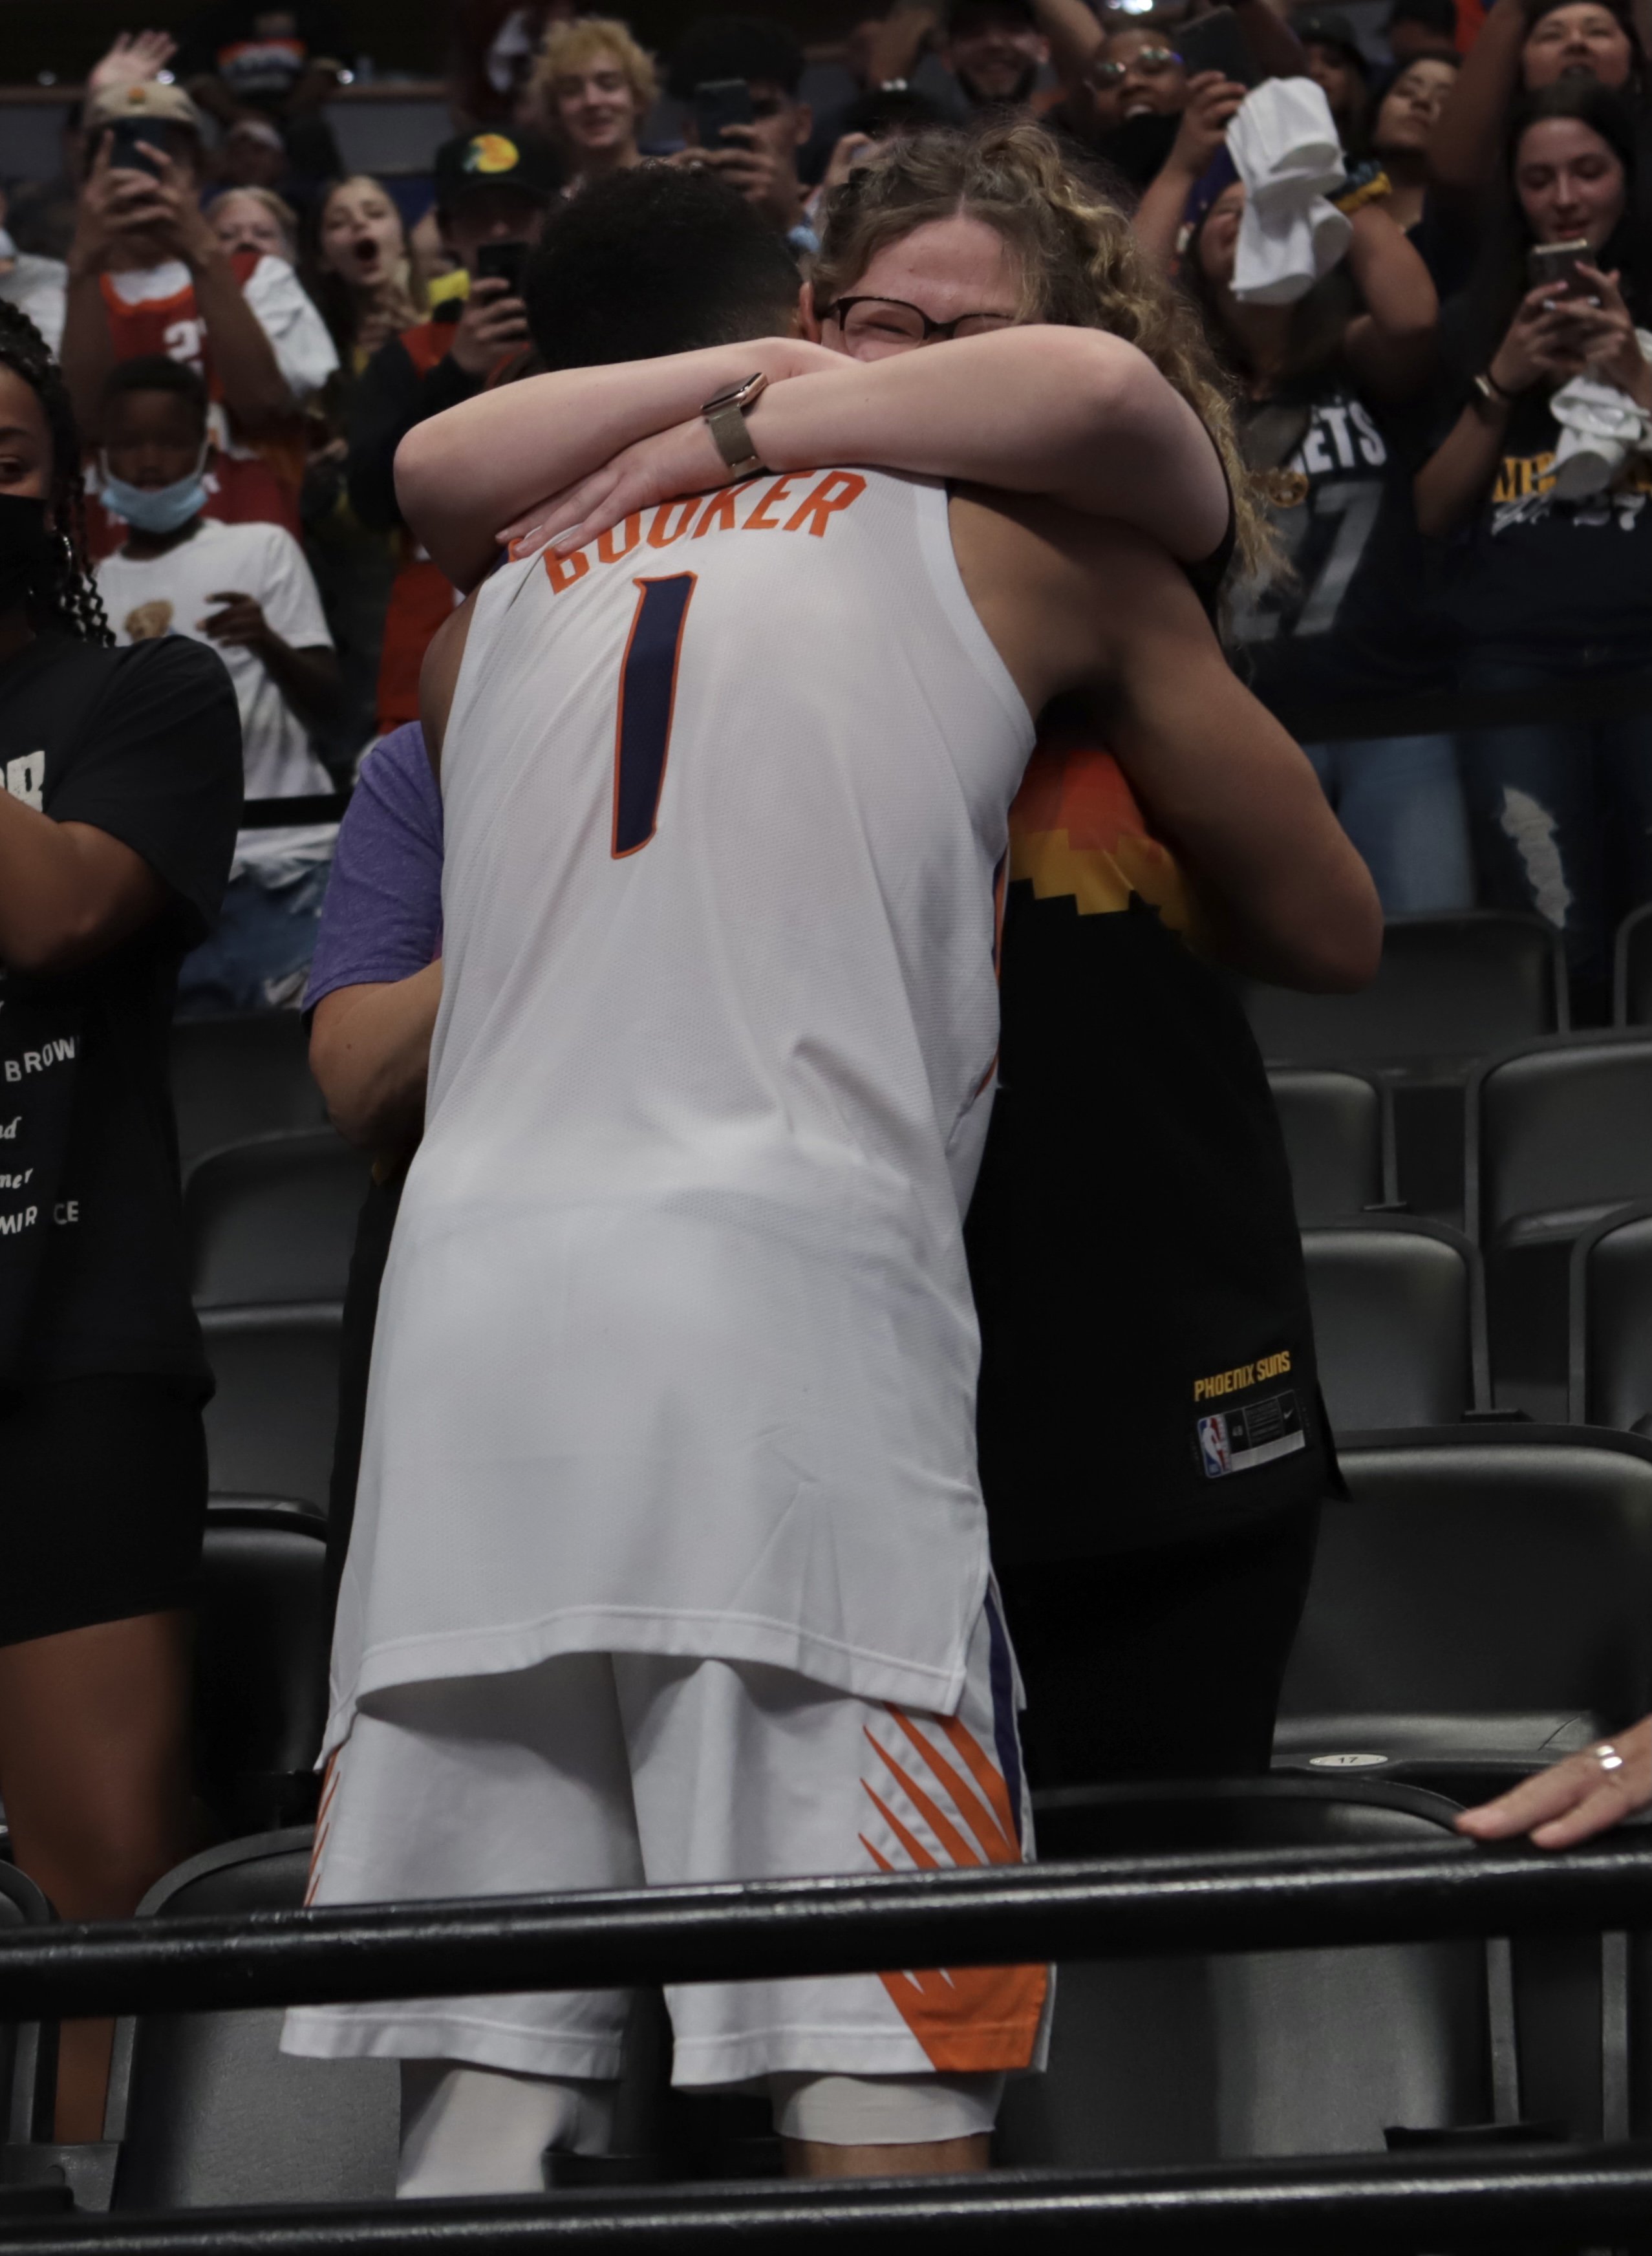 Devin Booker hugs his Mya Powell after the game against the Denver Nuggets during Round 2, Game 4 of the 2021 NBA Playoffs on June 13, 2021 at the Ball Arena in Denver, Colorado. | Source: Getty Images